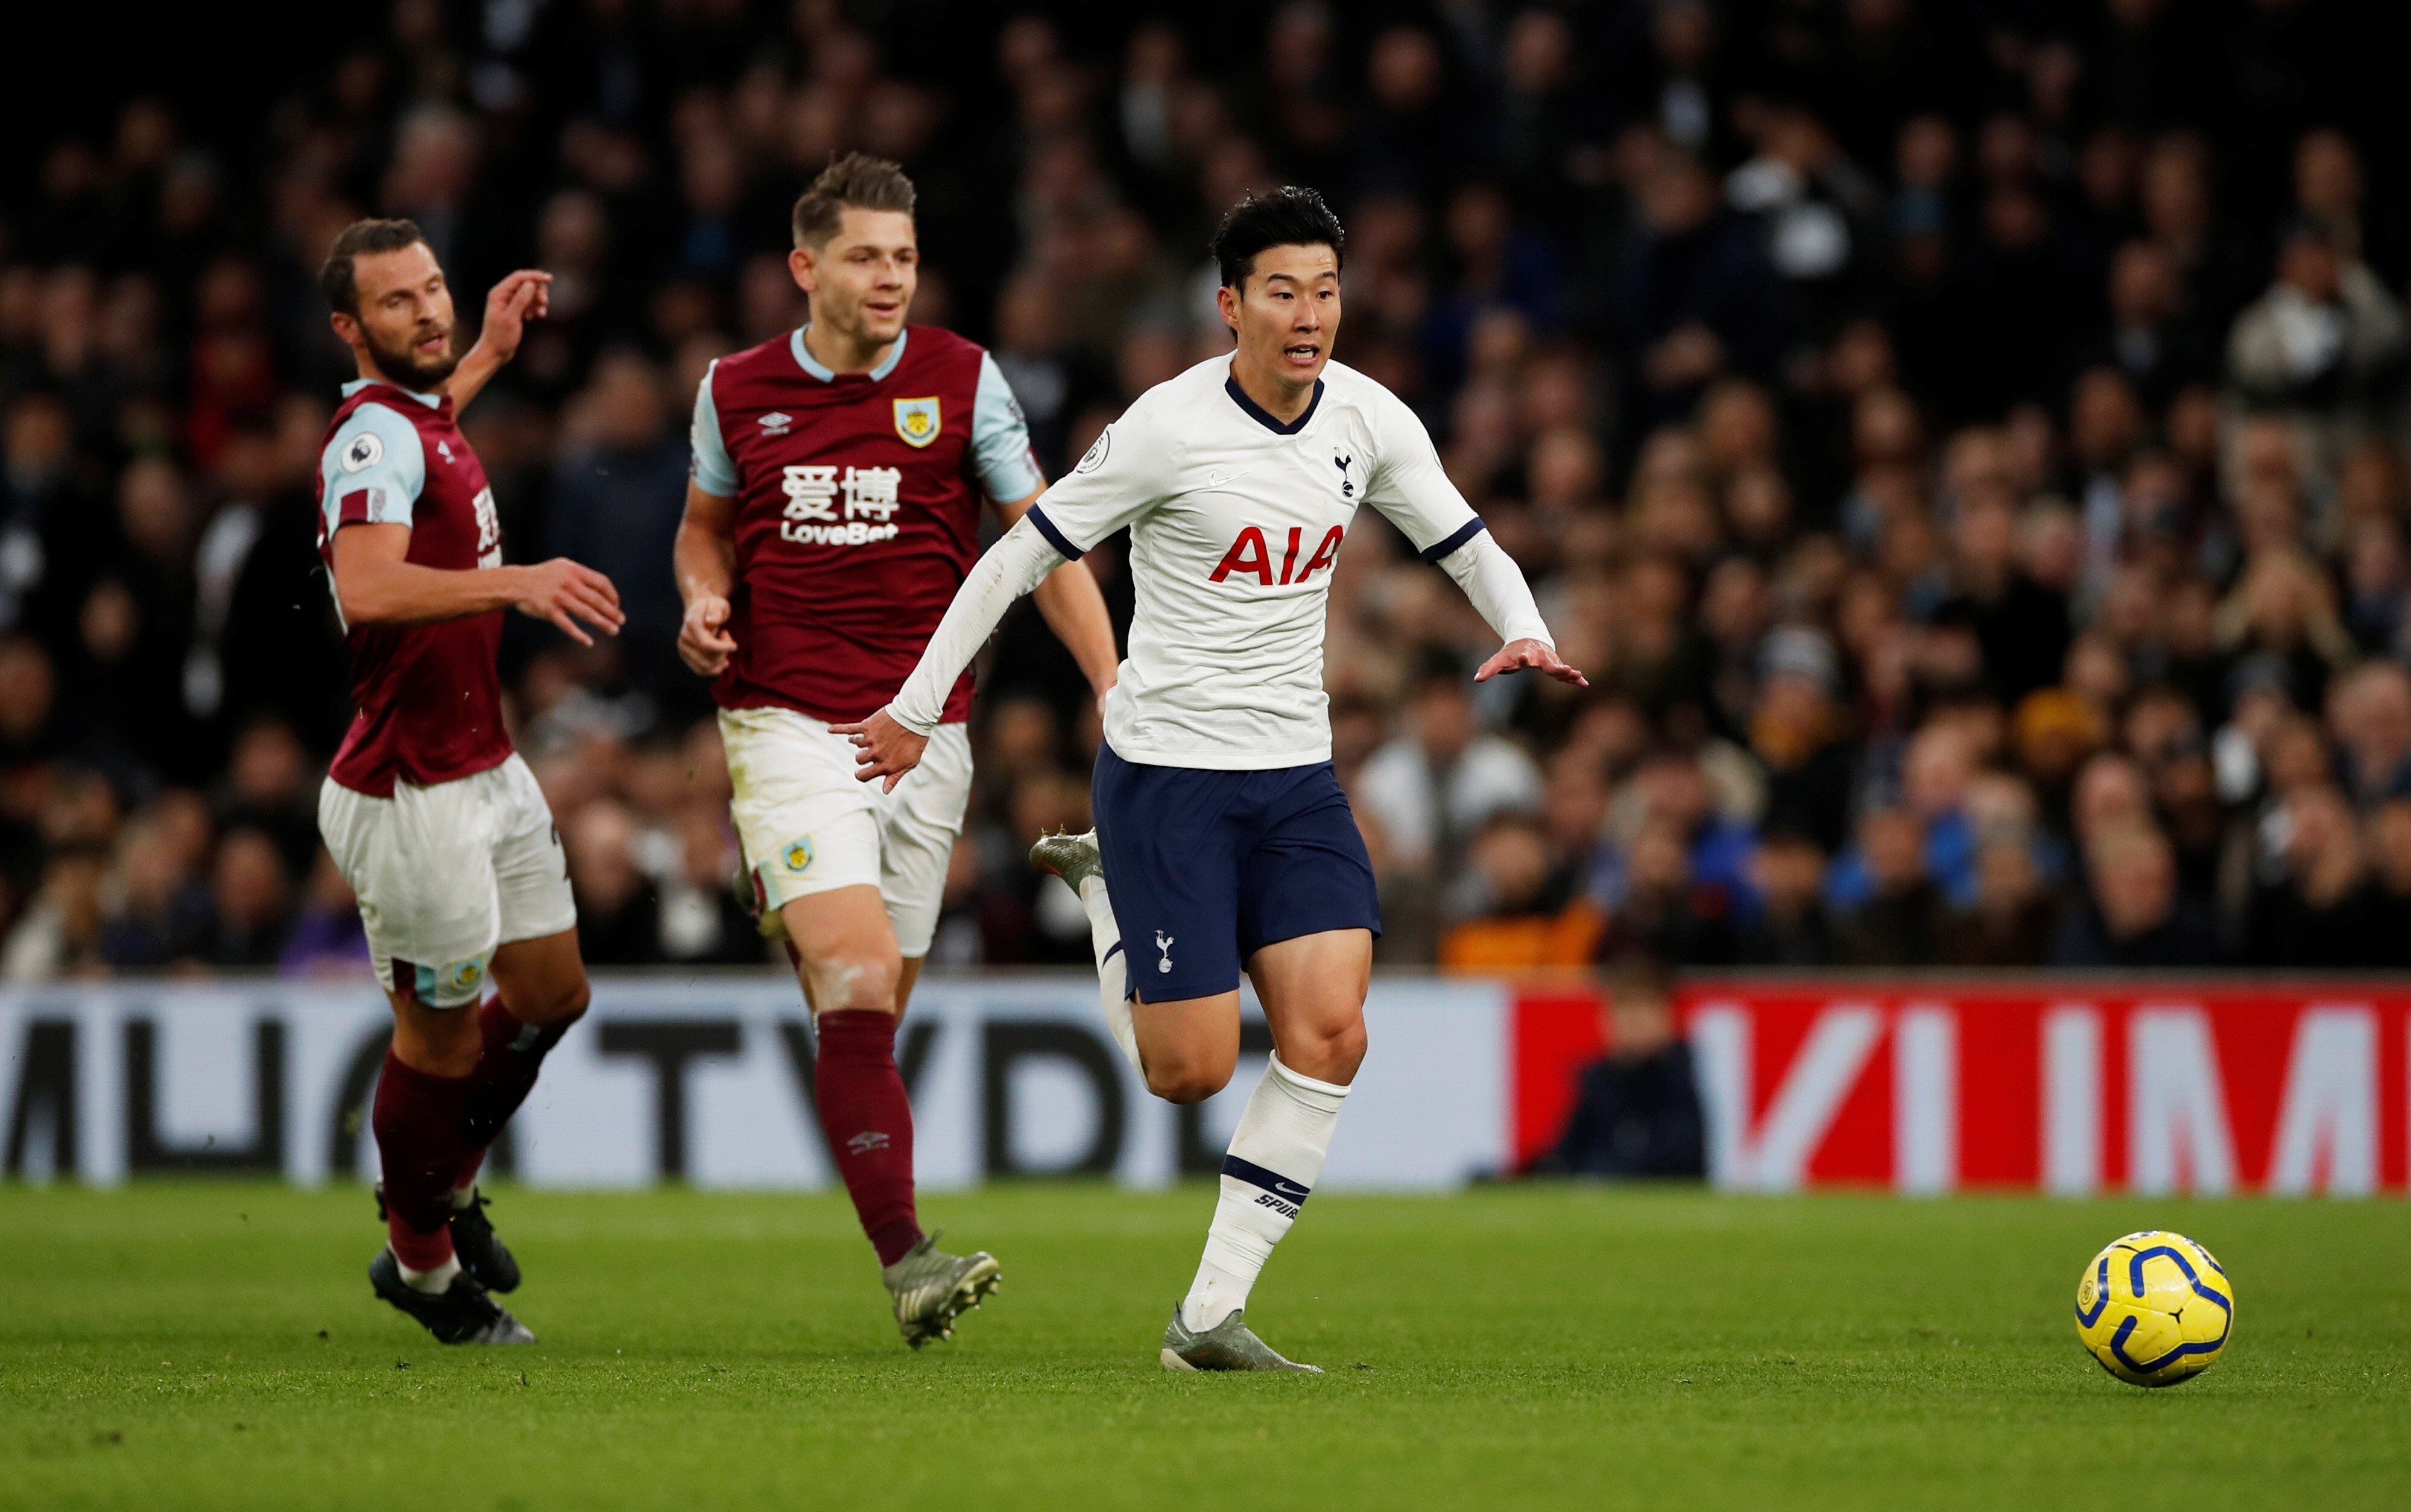 Son Heung-min awarded by the Best Footballer in Asia 2018 by Fox sports